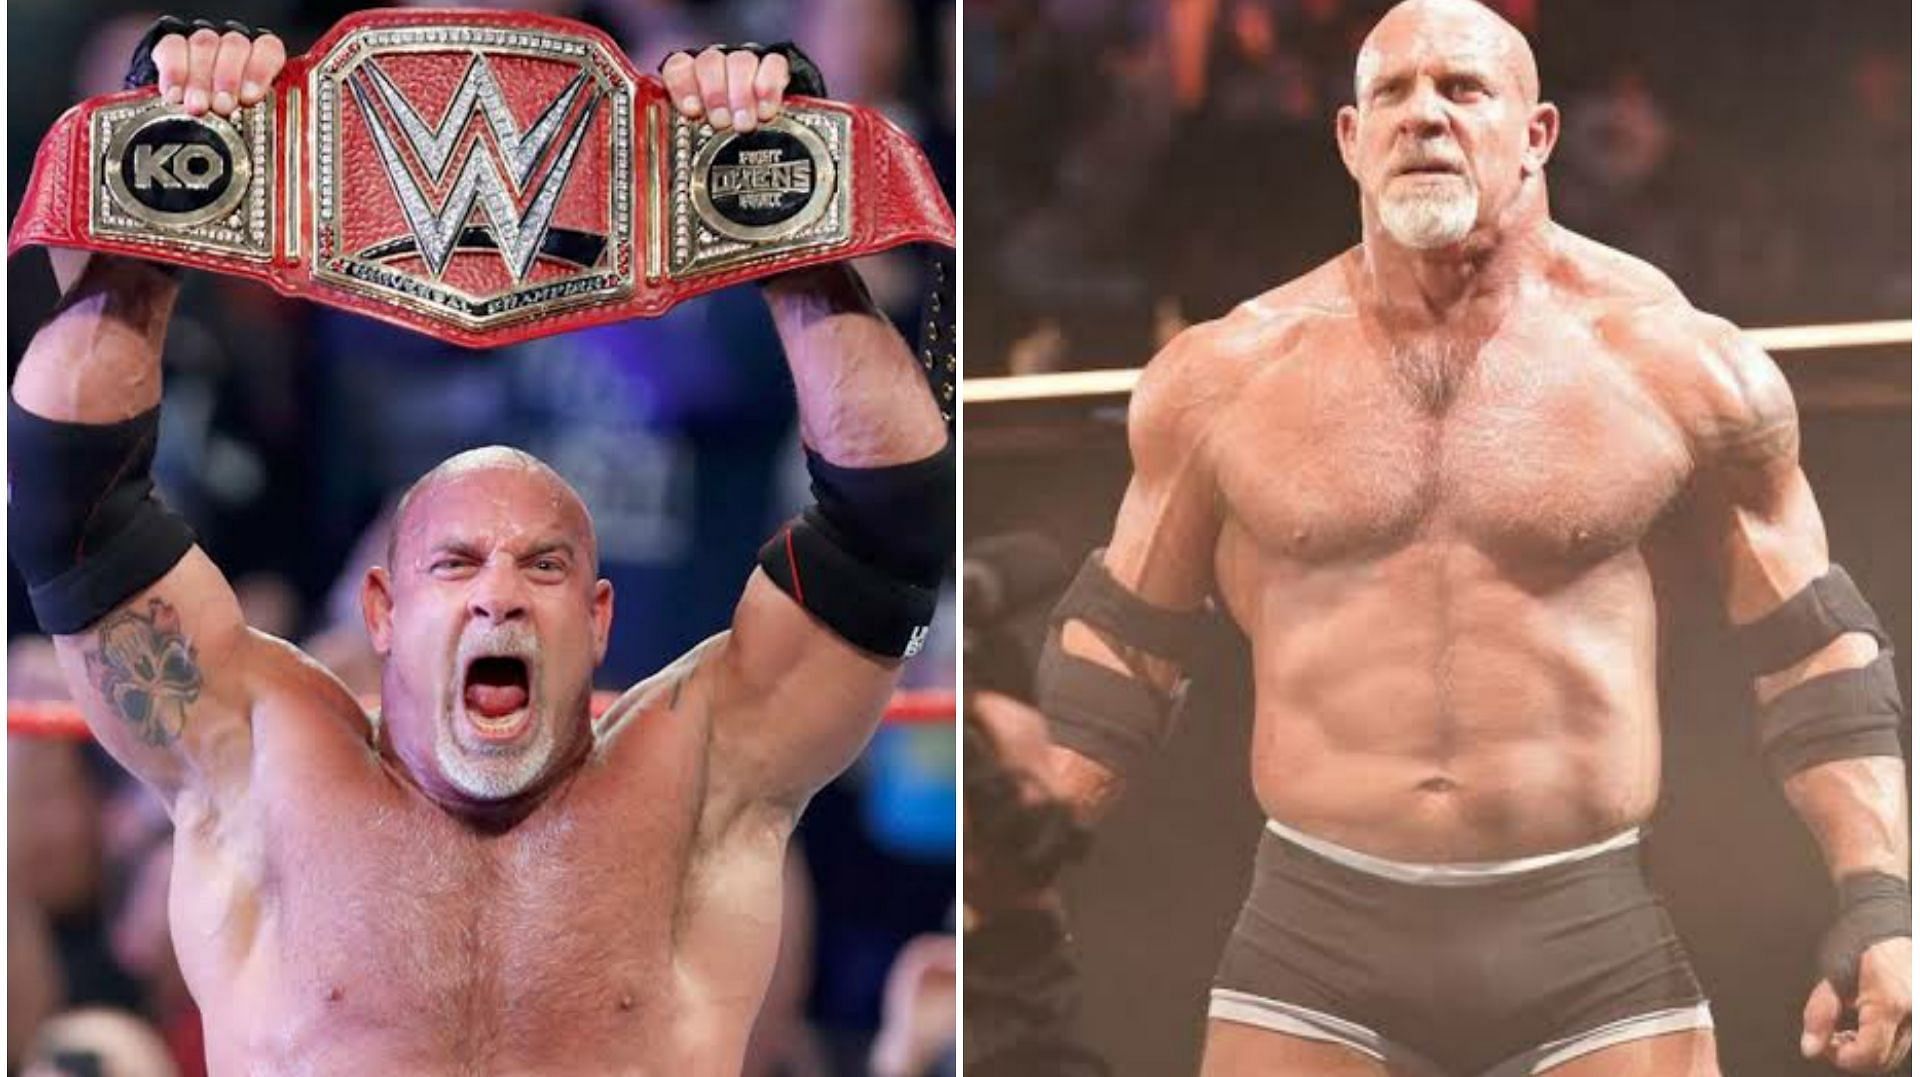 Goldberg is no longer under contract with WWE. 